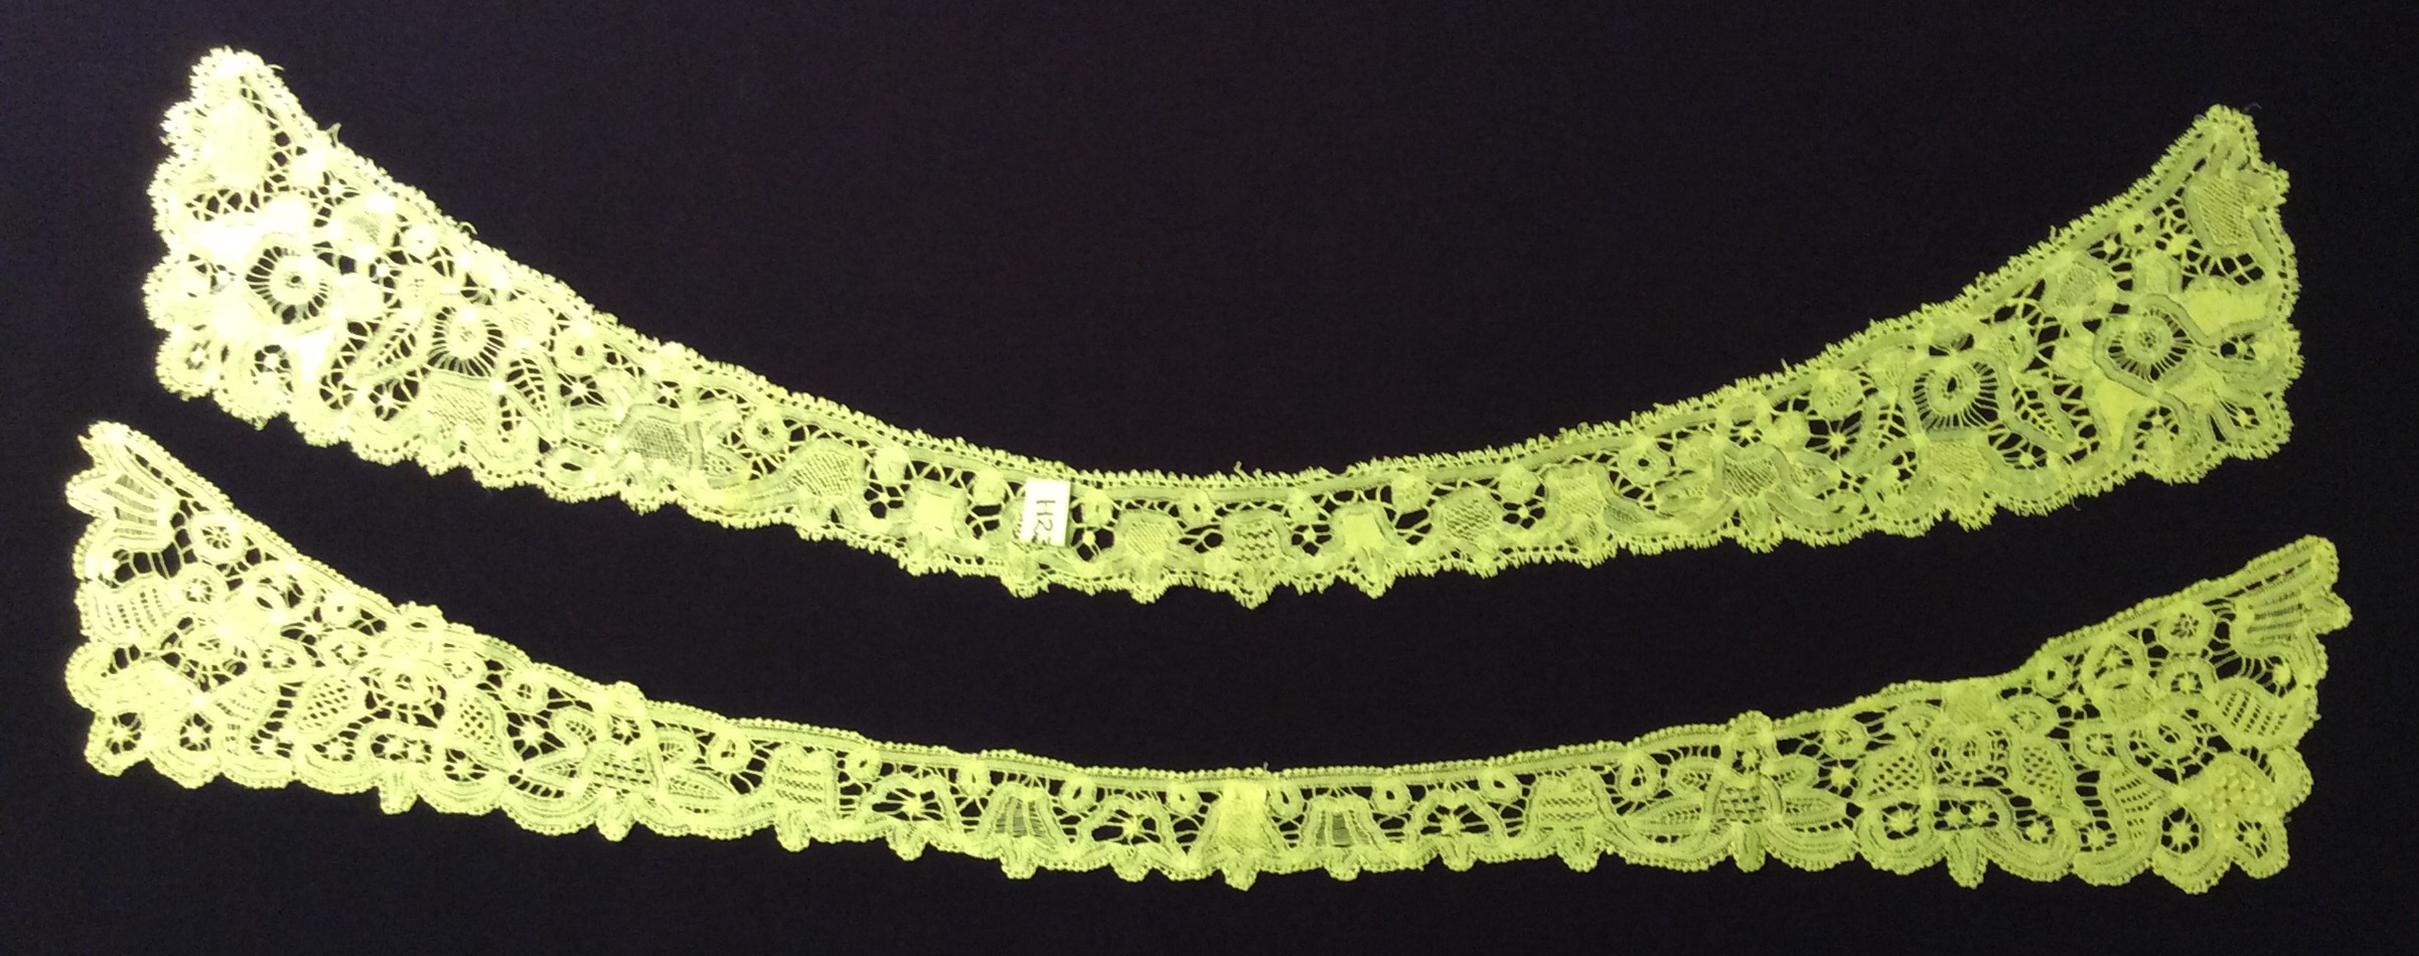 Comparison of shapes of two tape-lace collars, TWCMS_H2367 above, TWCMS_H2387 below